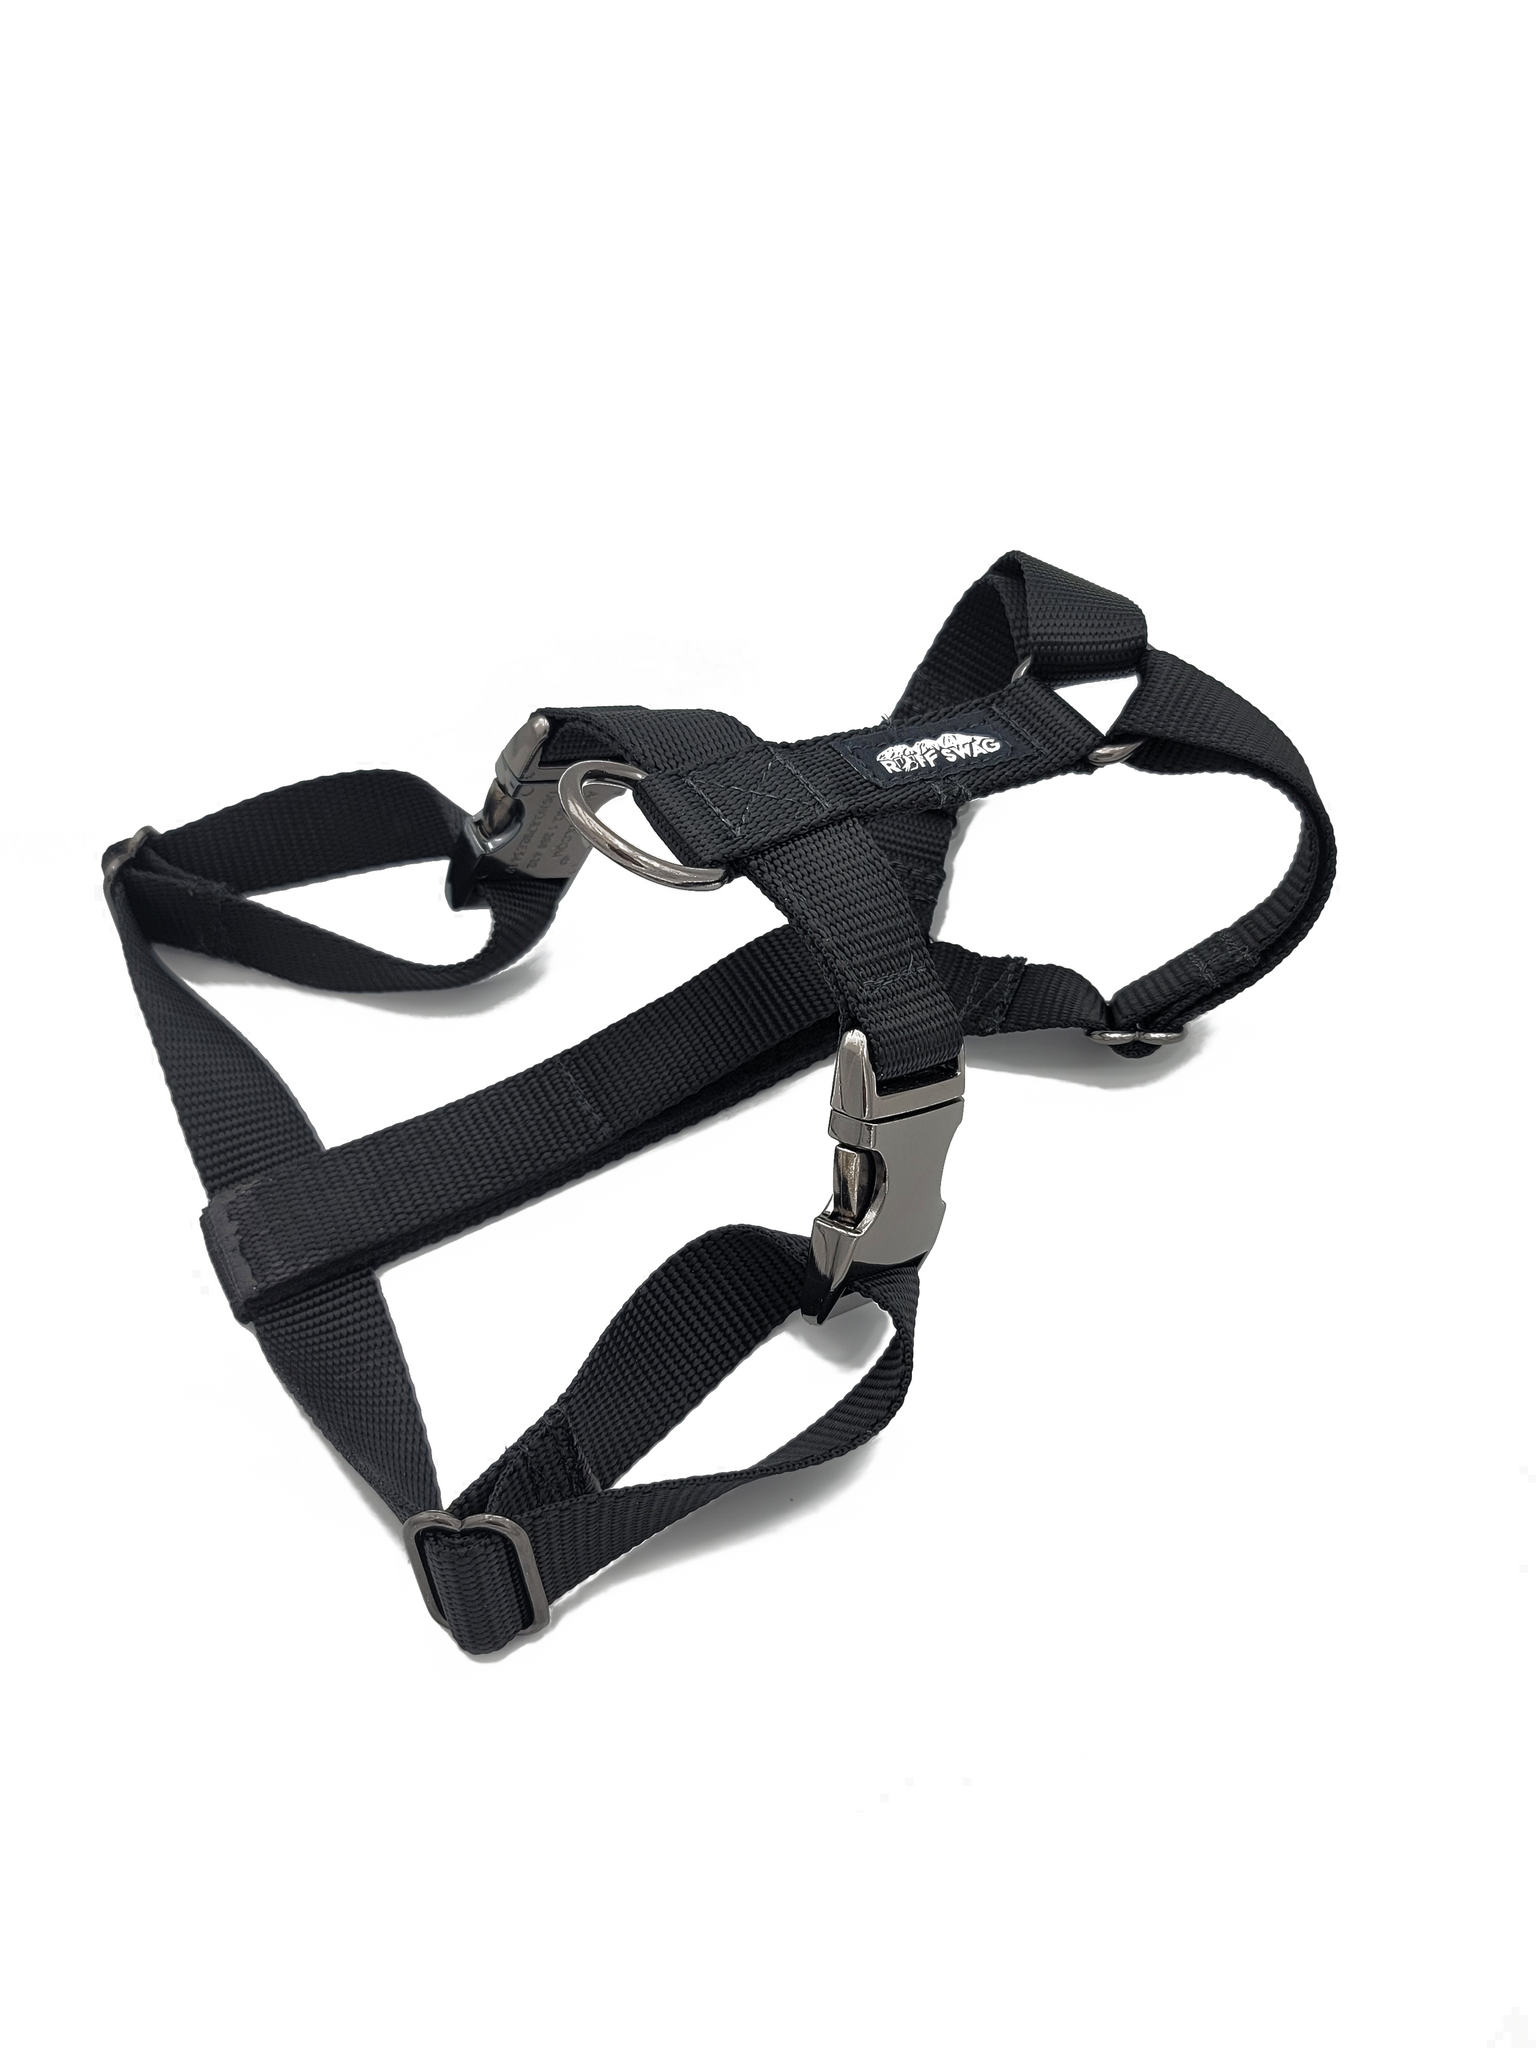 Puppy / Small Dog Harness